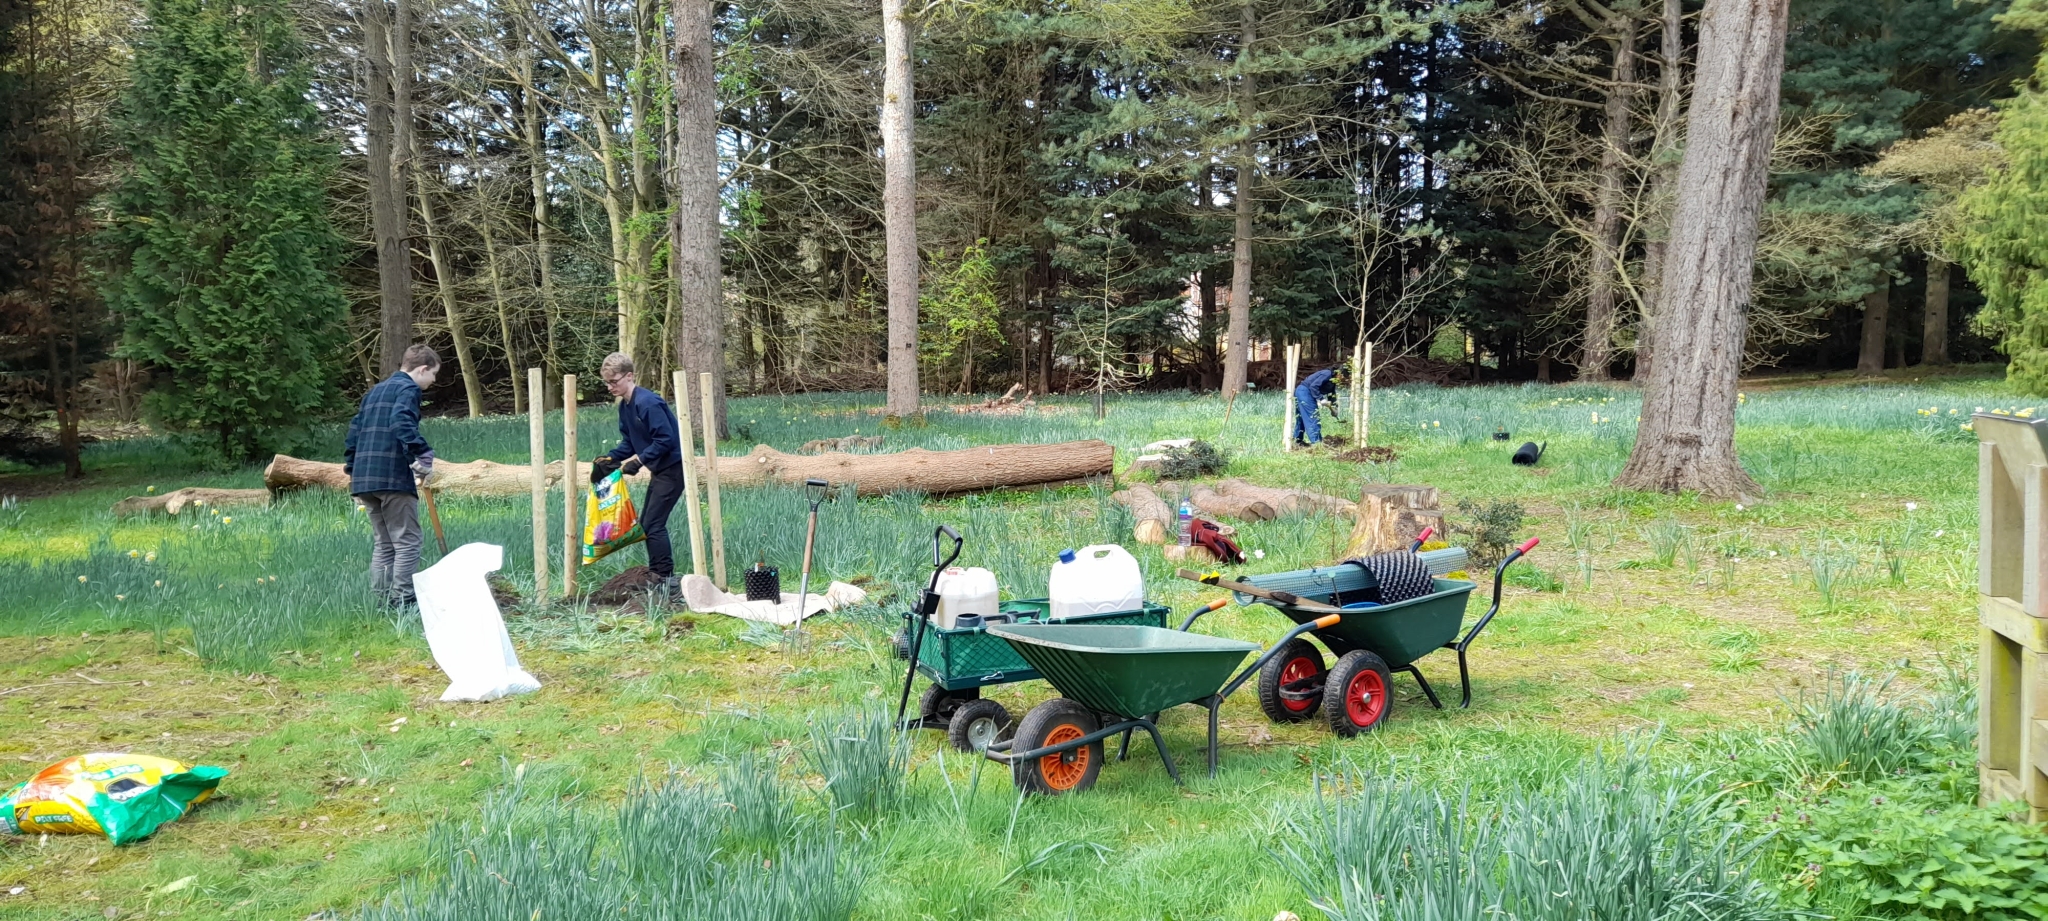 A photo from the FoTF Conservation Event - April 2023 - Tree Planting at Lynford Arboretum : Two volunteers prepare a hole dug for a tree